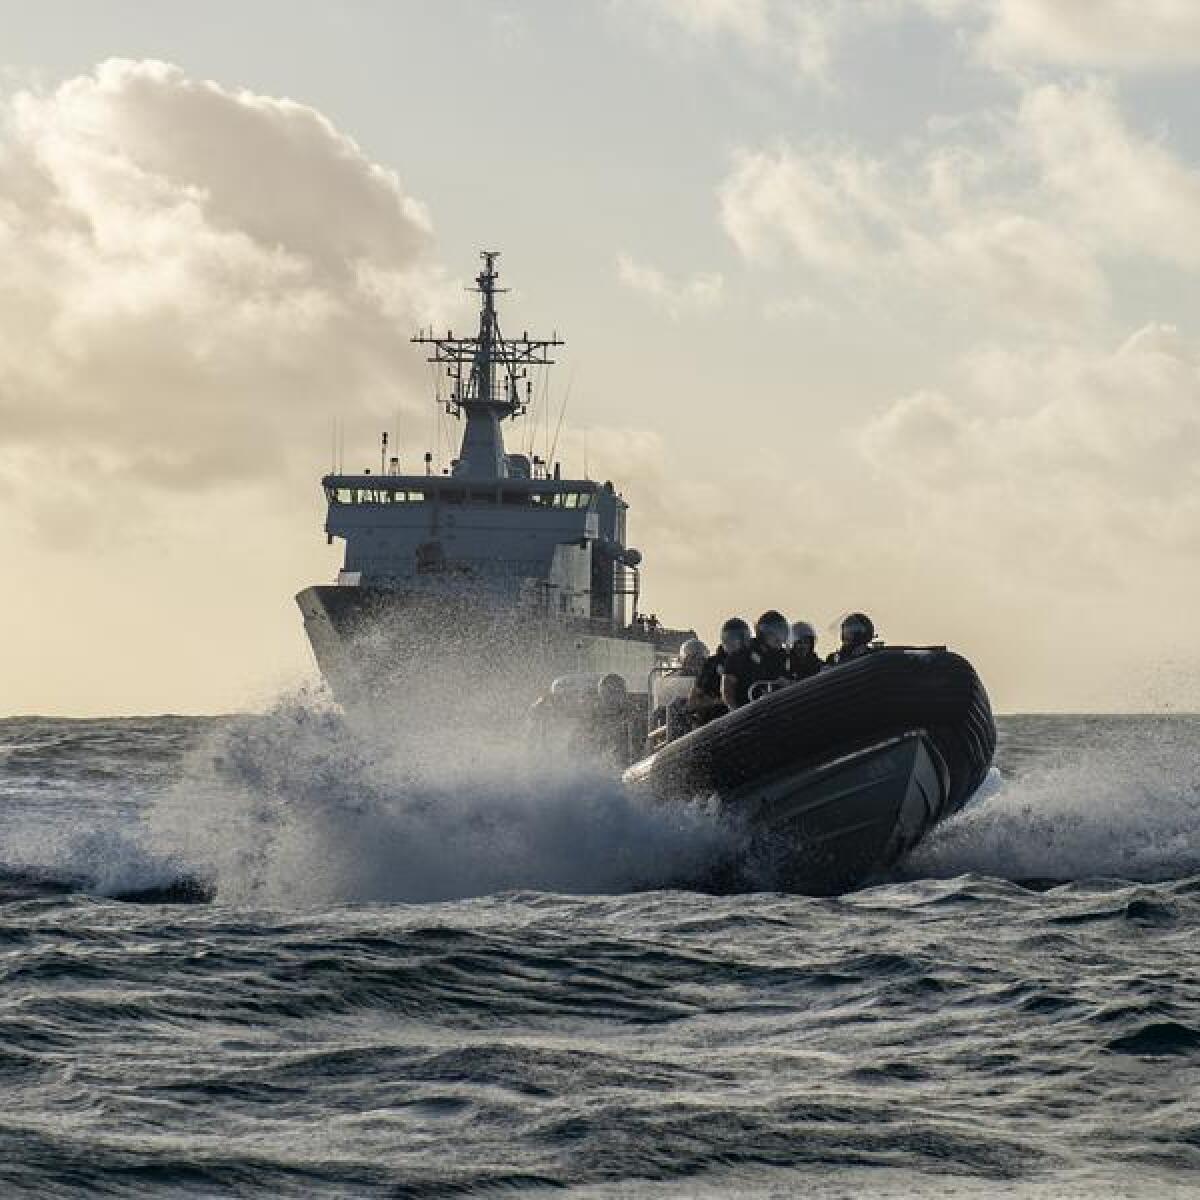 New Zealand Defence Force marine vessels and crew